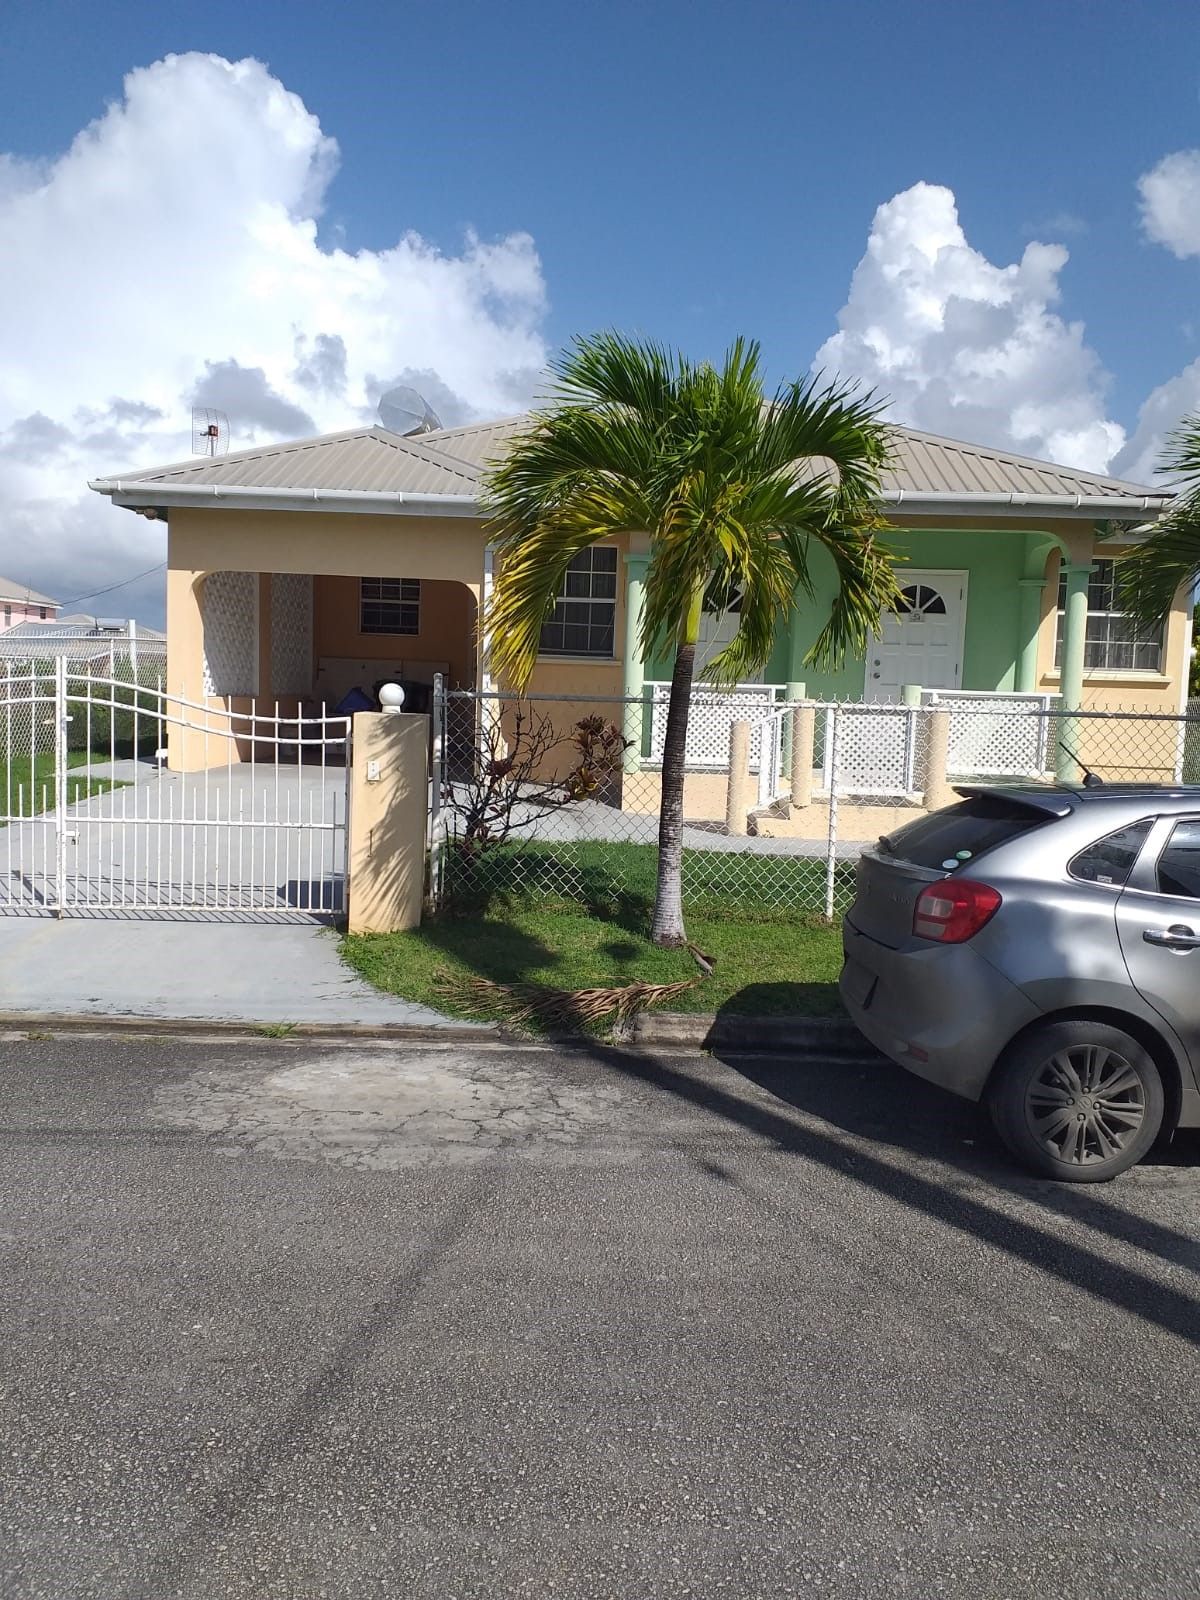 Lot 24 Manderley Gardens Mangrove St Philip 2 Bedrooms House For Sale At Barbados